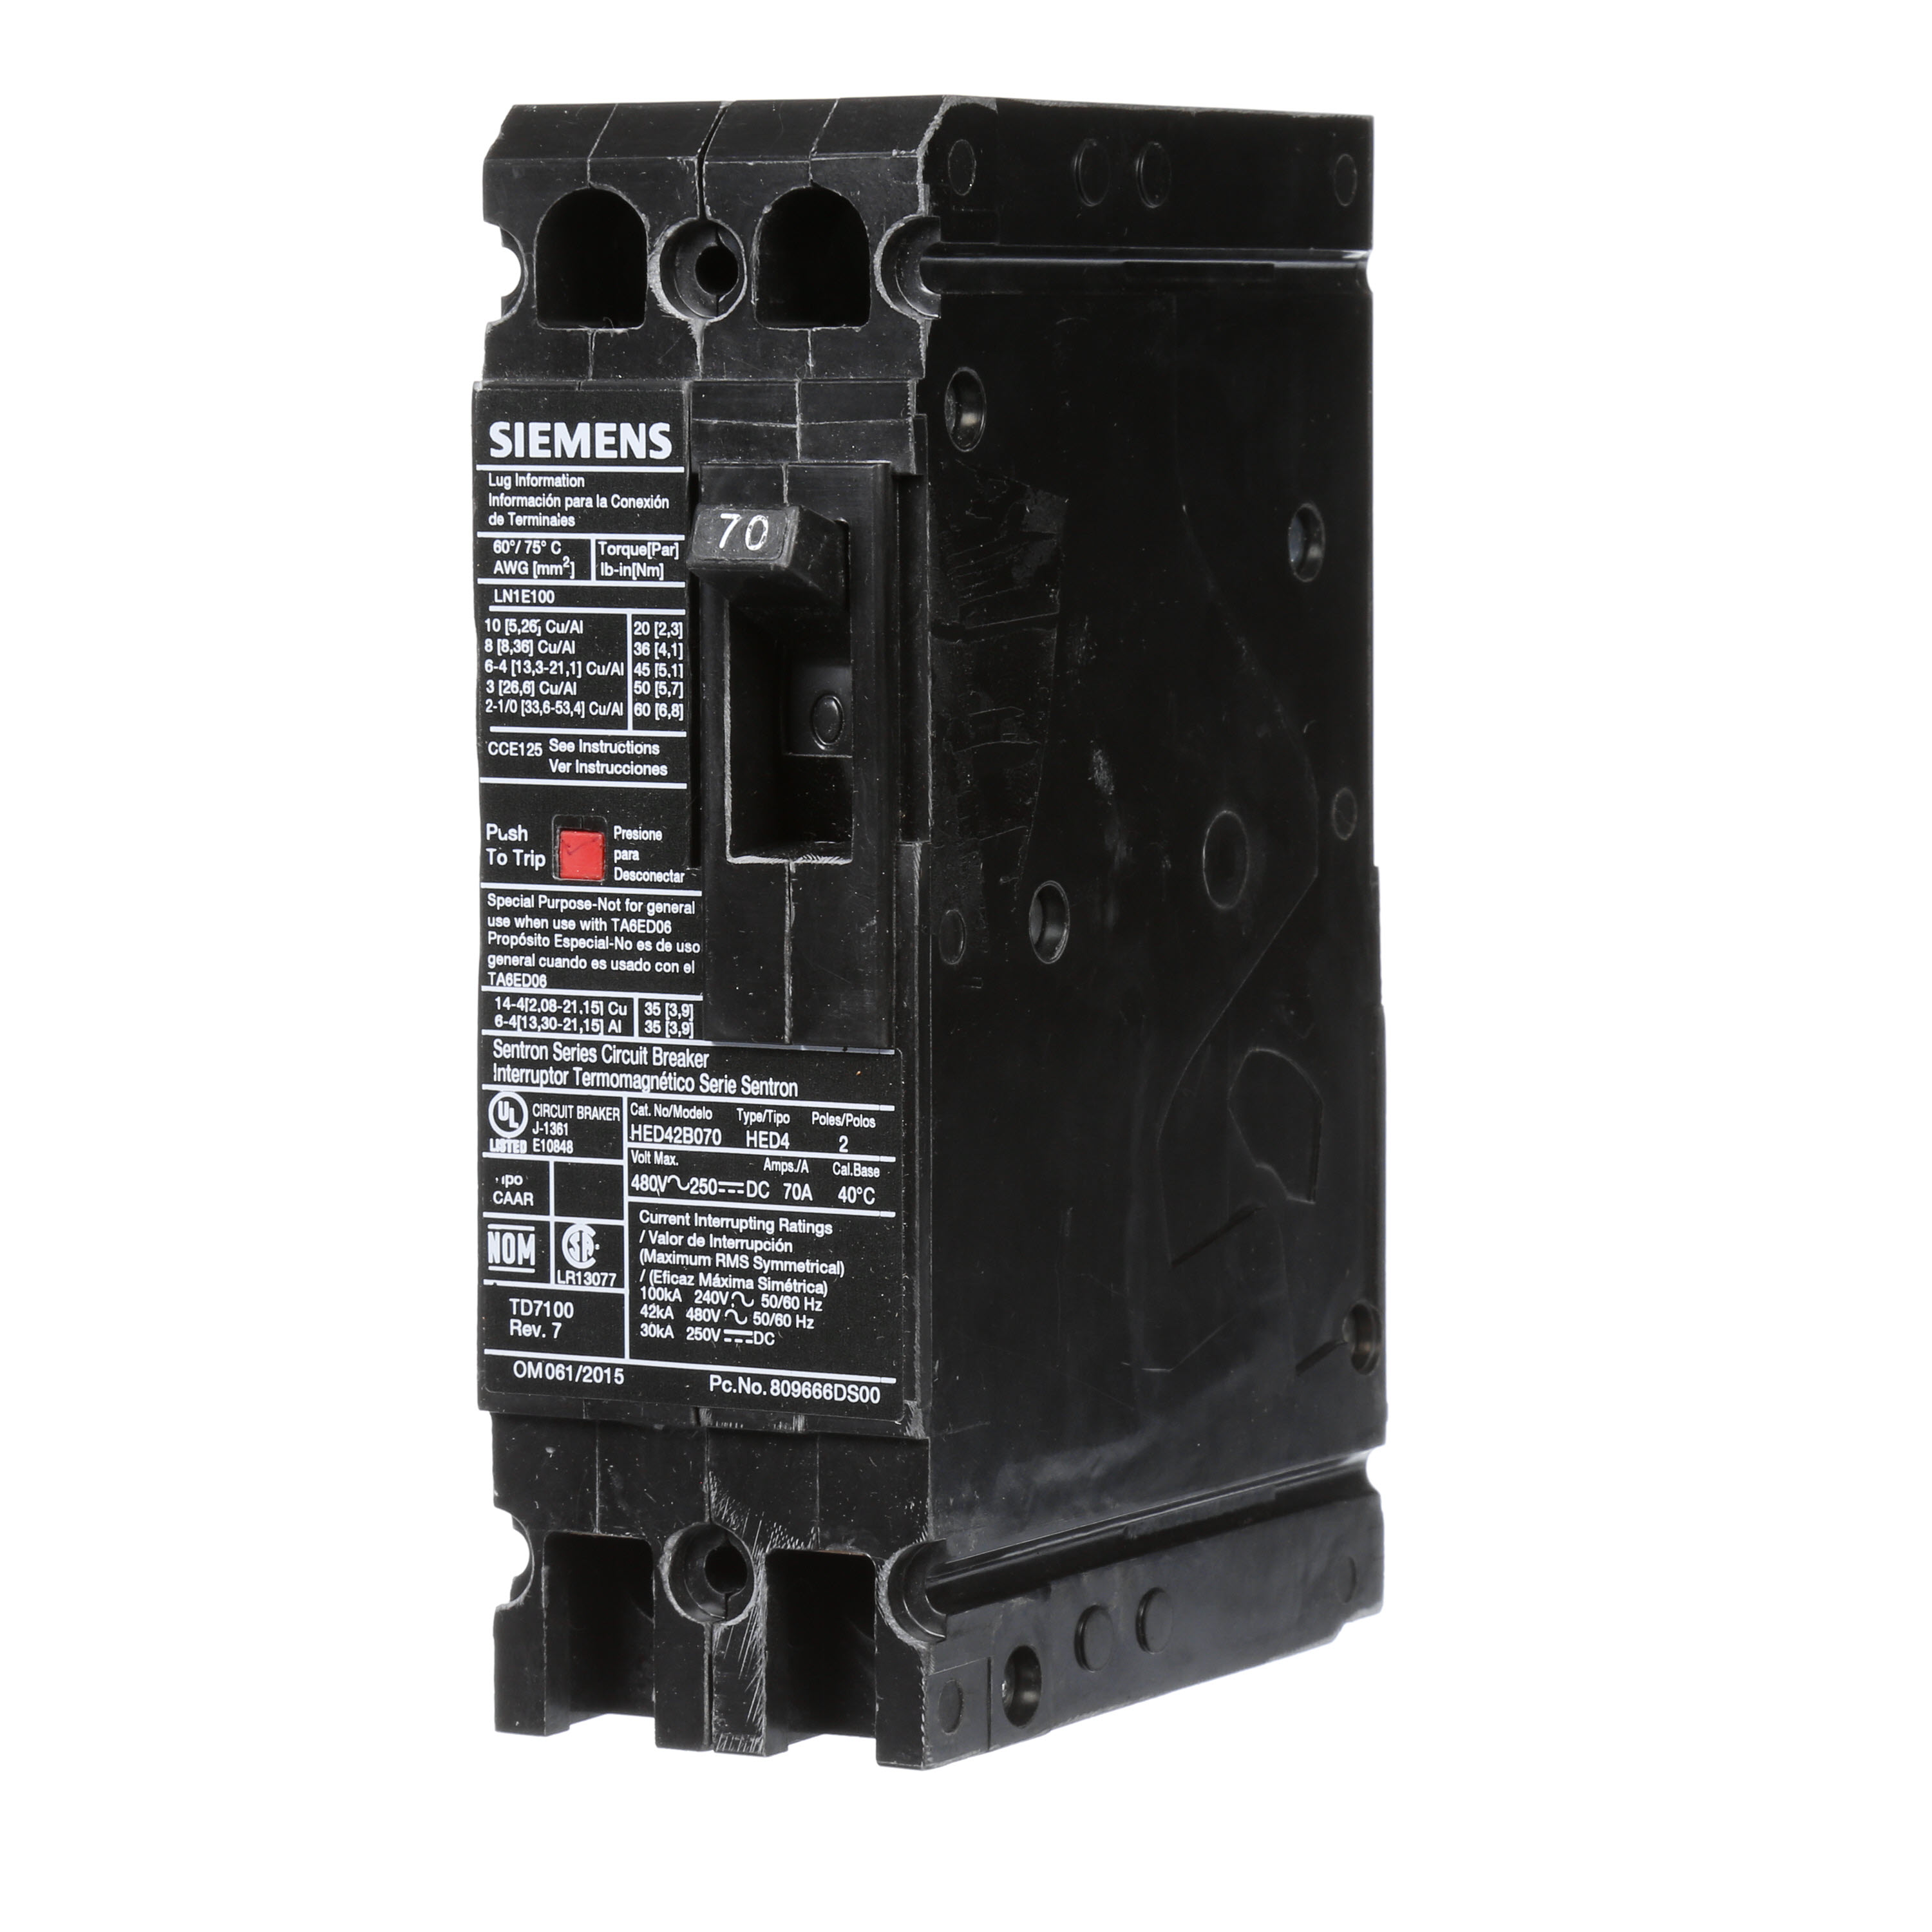 SIEMENS LOW VOLTAGE SENTRON MOLDED CASE CIRCUIT BREAKER WITH THERMAL - MAGNETICTRIP UNIT. STANDARD 40 DEG C BREAKER ED FRAME WITH HIGH BREAKING CAPACITY. 70A 2-POLE (42KAIC AT 480V). NON-INTERCHANGEABLE TRIP UNIT. SPECIAL FEATURES LOAD LUGS ONLY (LN1E100) WIRE RANGE 10 - 1/0AWG (CU/AL). DIMENSIONS (W x H x D) IN 2.00x 6.4 x 3.92.